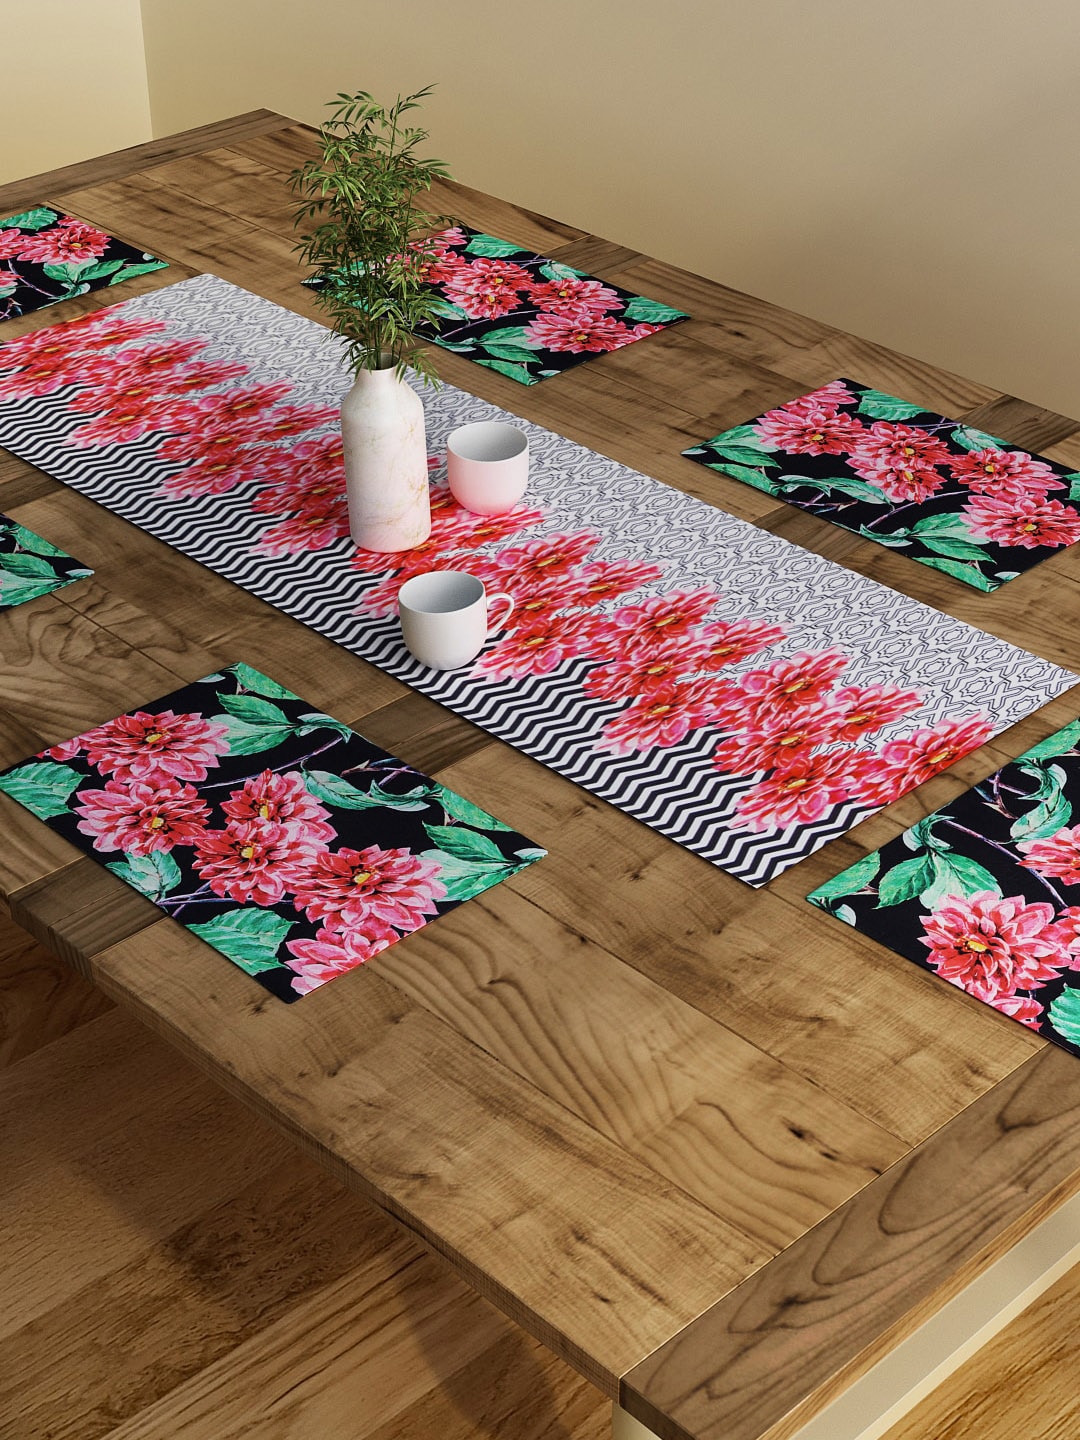 SEJ by Nisha Gupta Set of 6 Red Printed Table Placemats & Runner Price in India